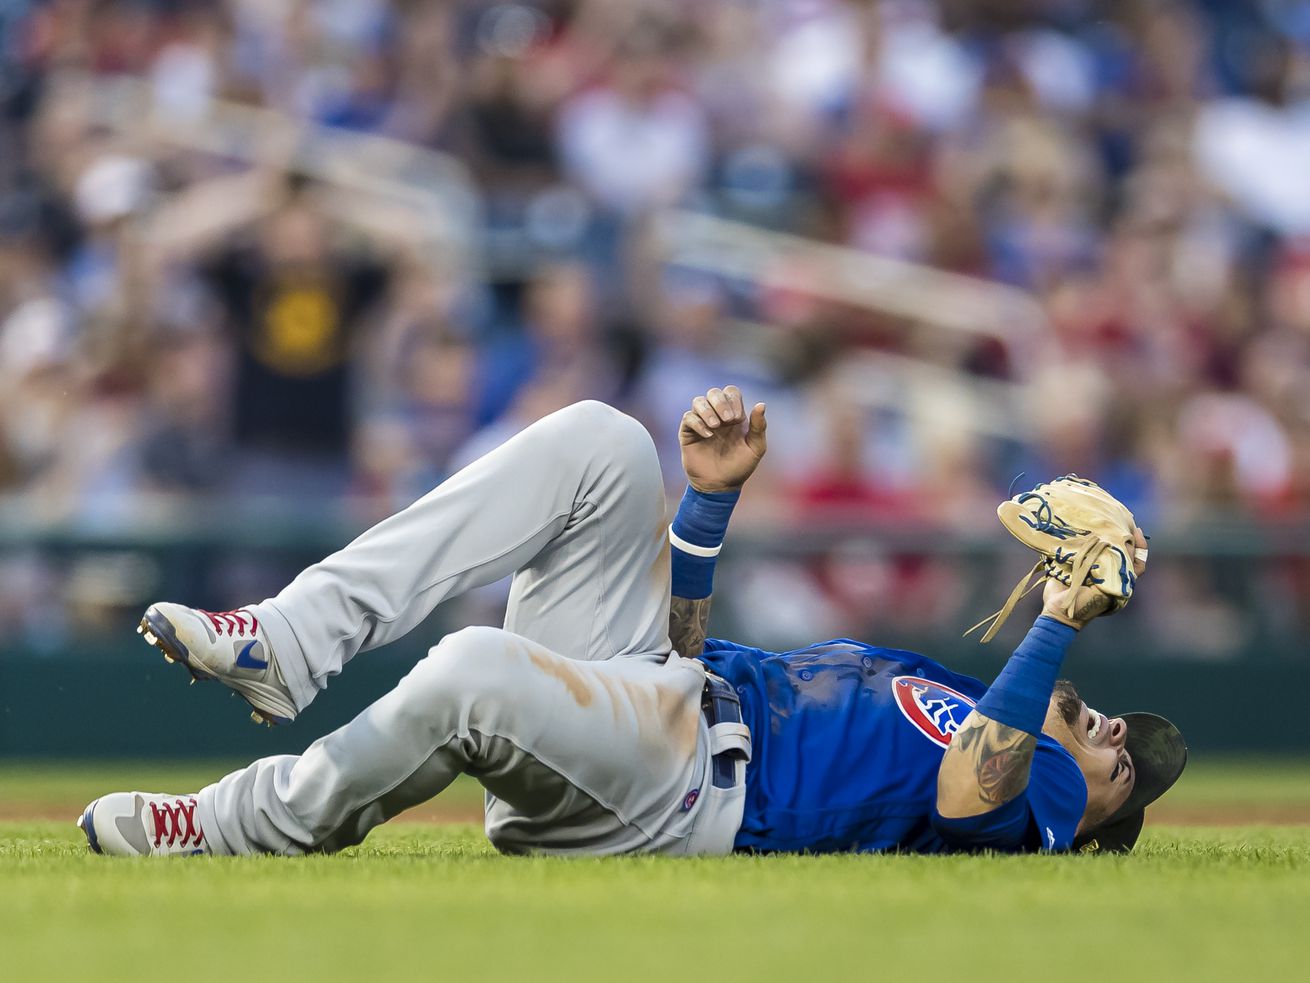 Baez on the ground Sunday in Washington after suffering what appears to be a bruised heel.